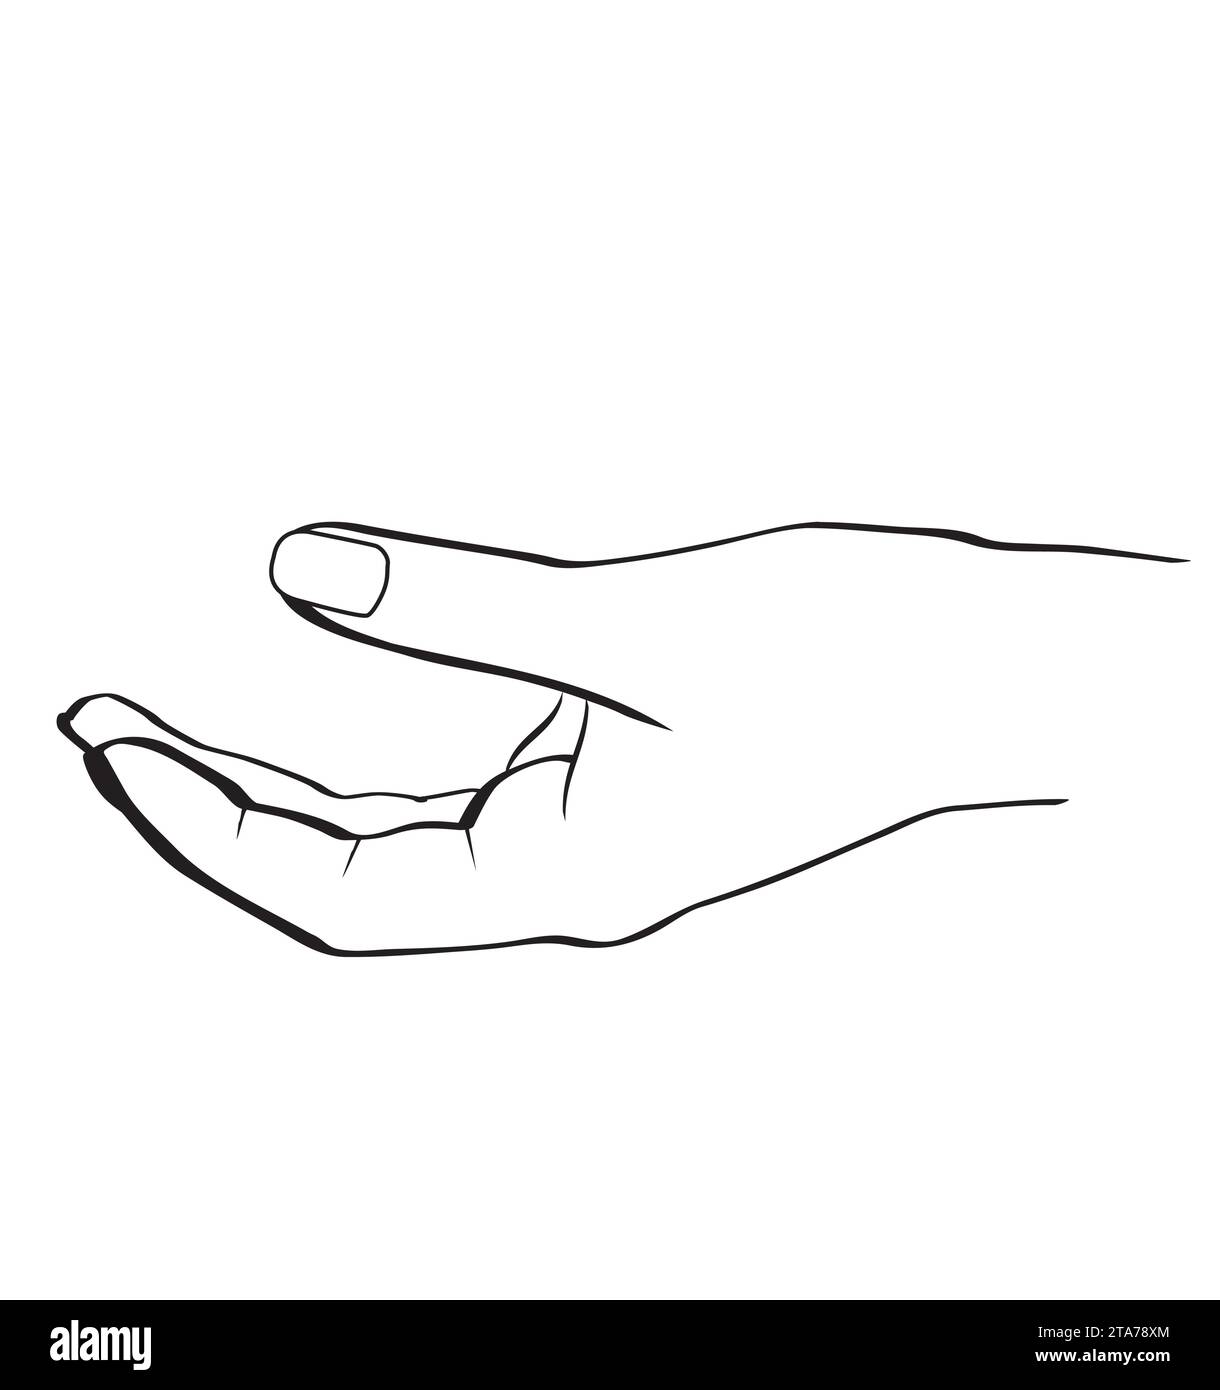 Template of a drawn hand that could hold something Stock Vector